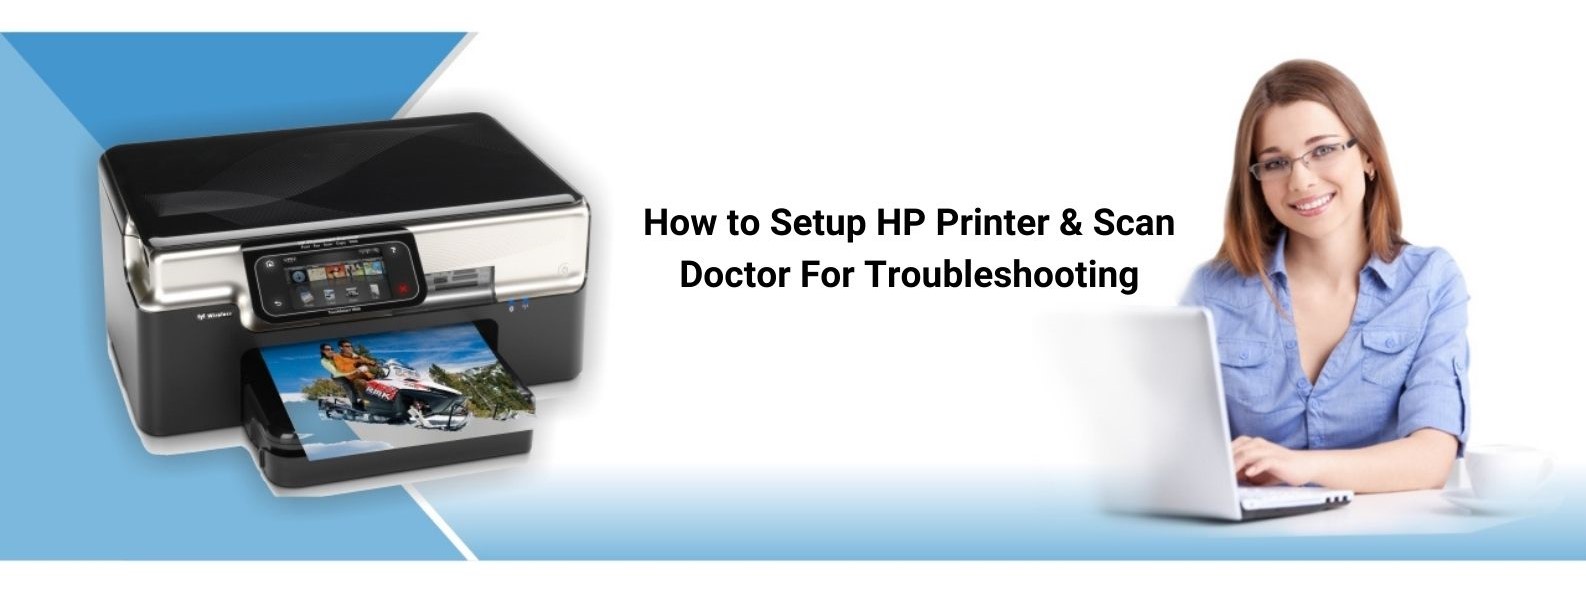 How to Setup HP Printer & Scan Doctor For Troubleshooting